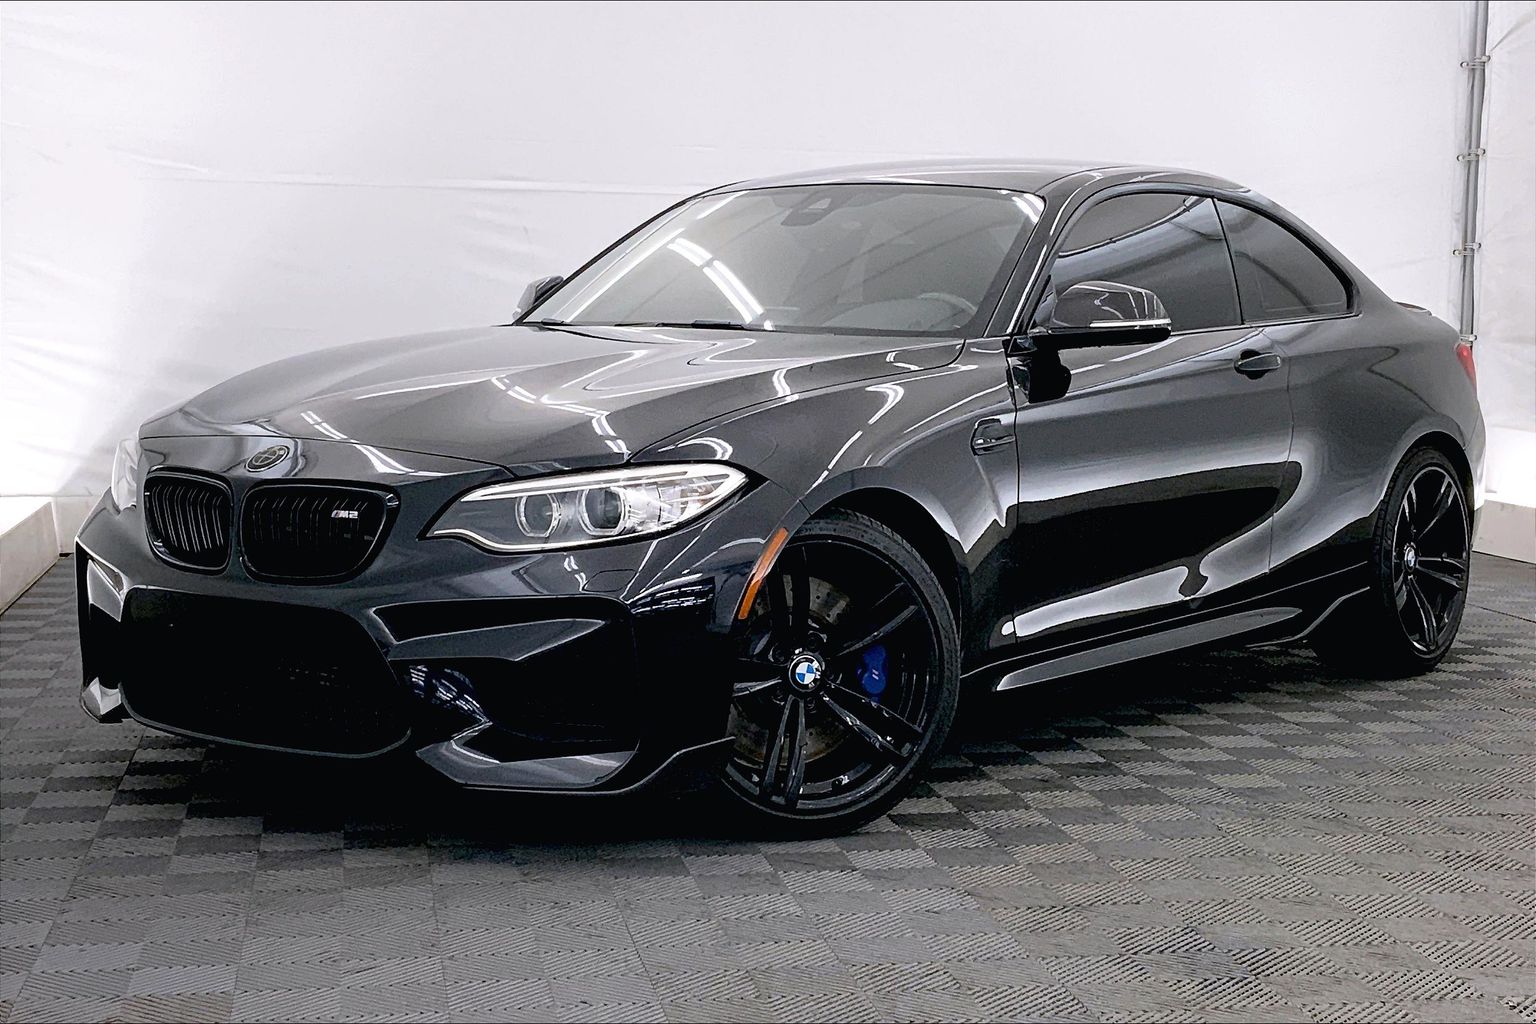 Used 2016 BMW M2 2dr Cpe for Sale in Spokane, WA